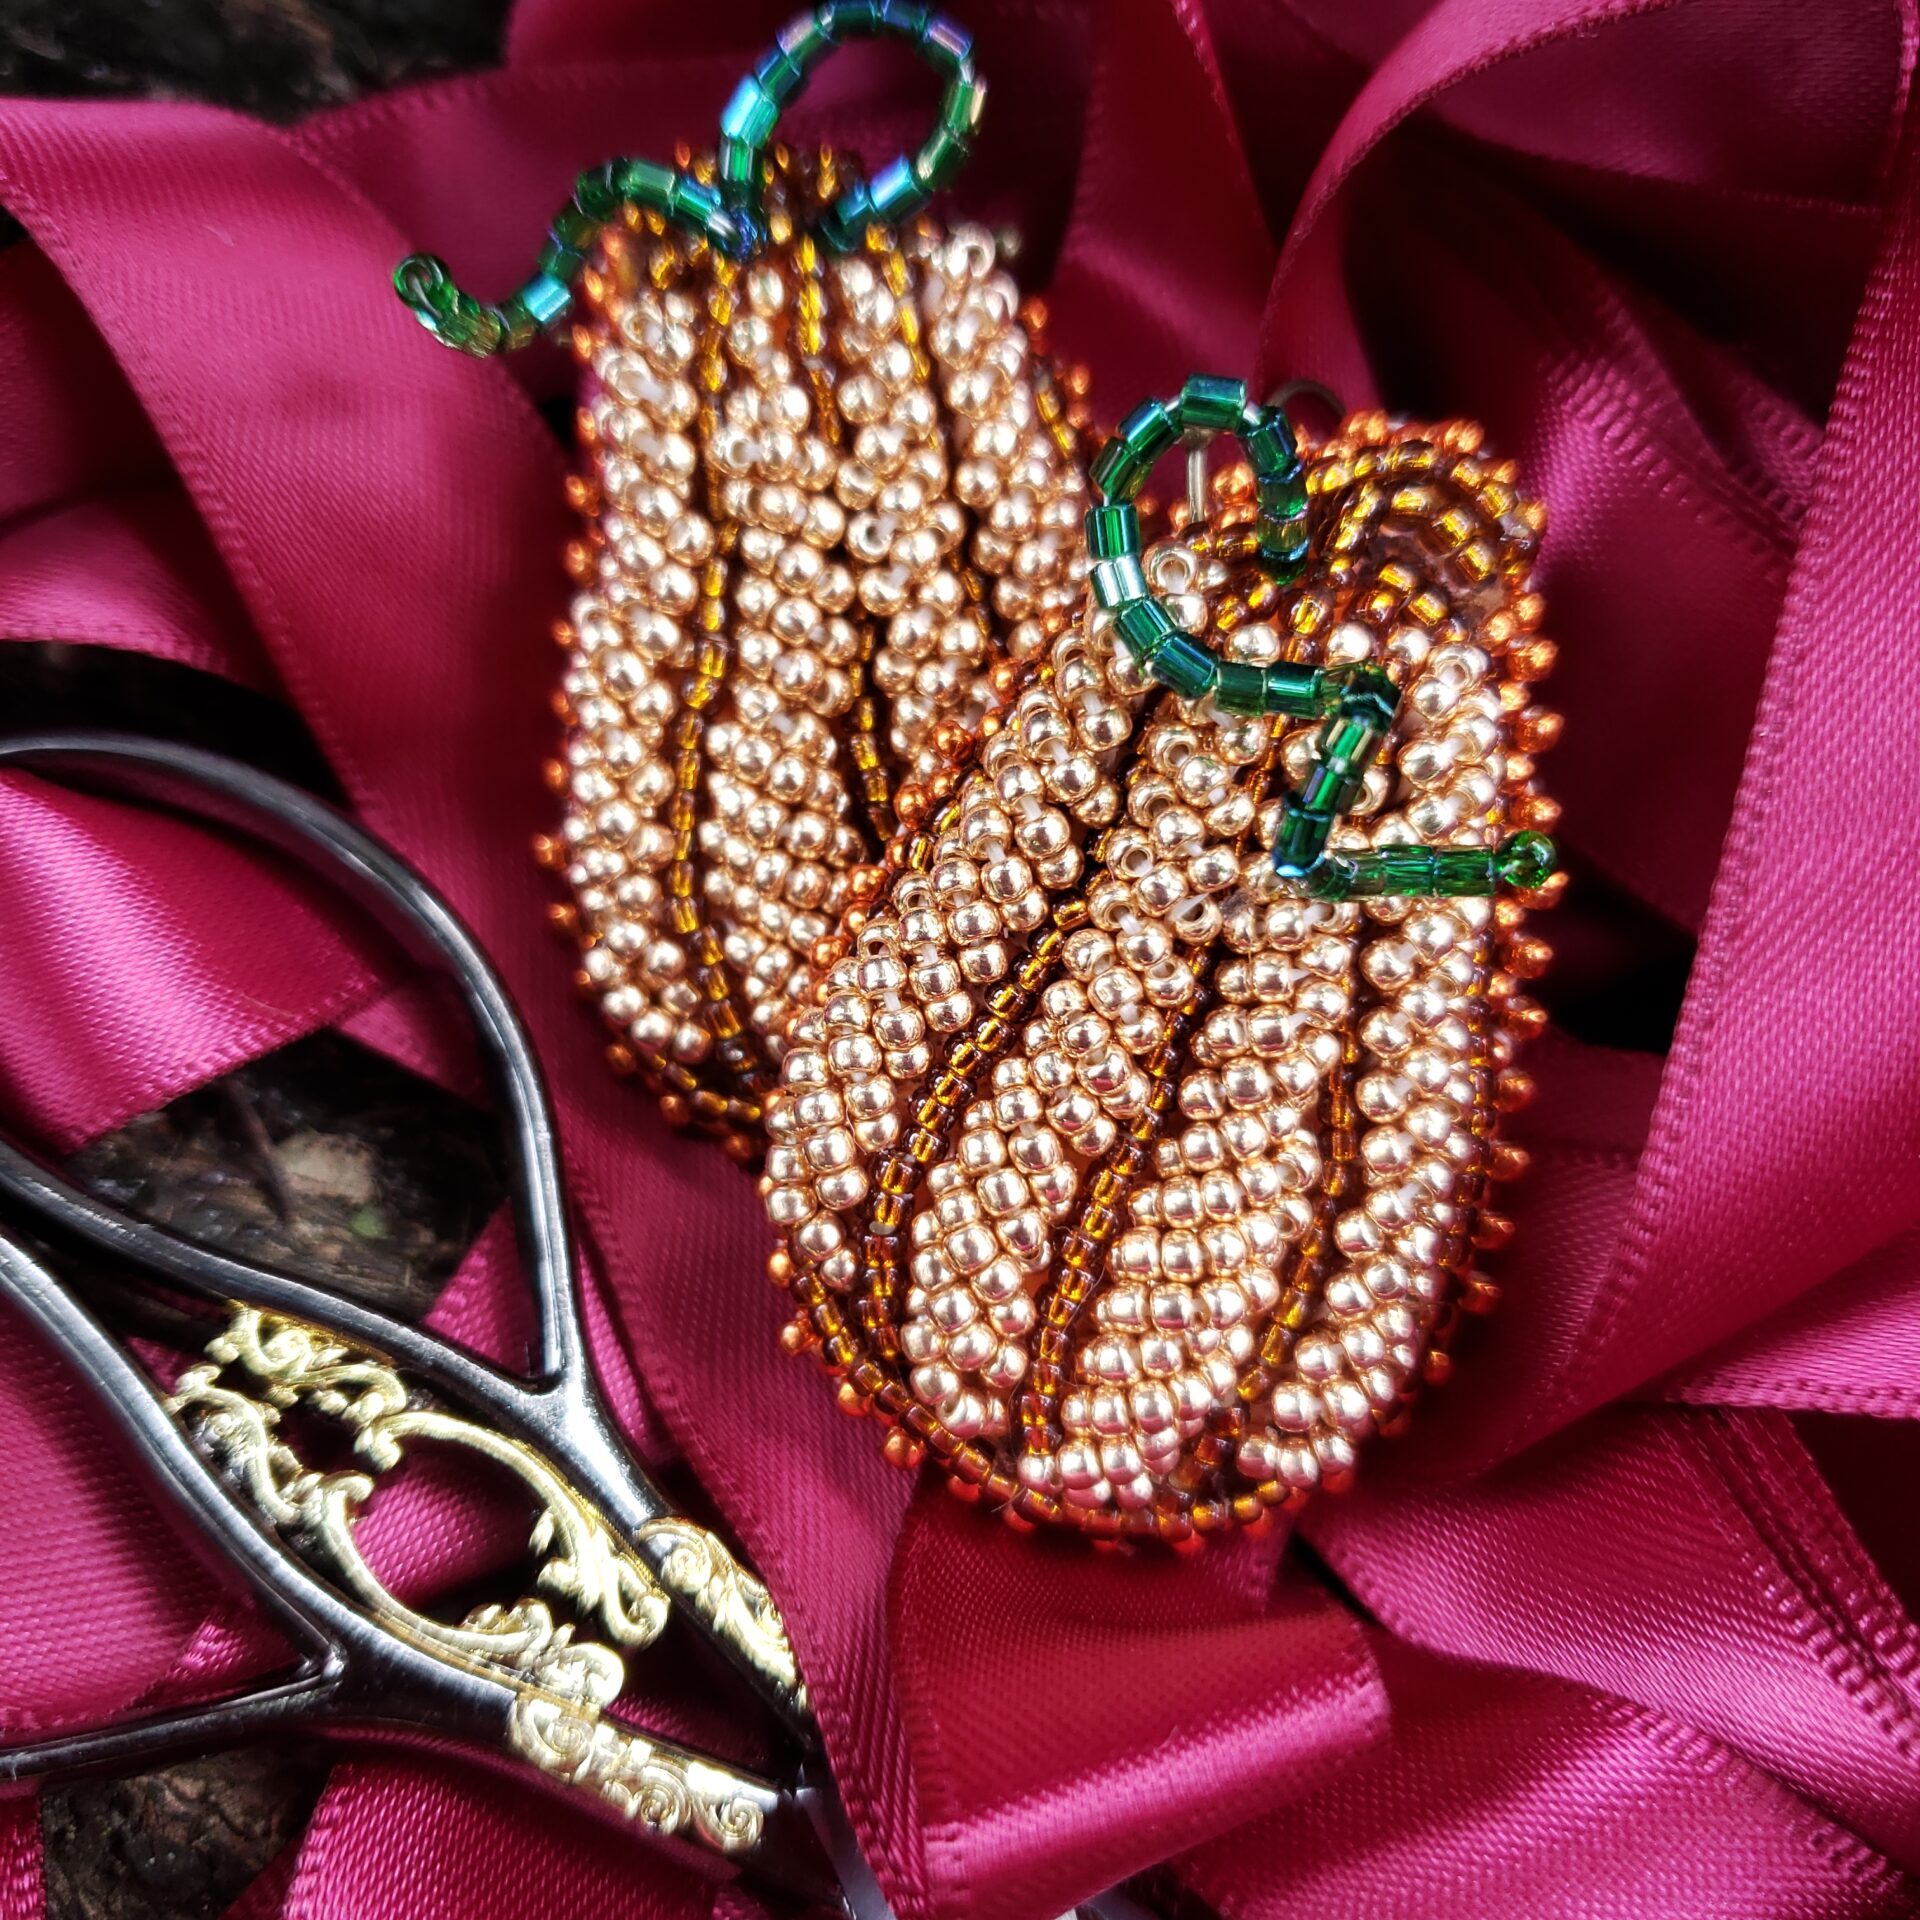 Laurel Thomas, Beadwork, Moccassins, Jewelry, Indigenous Artist, First Nations, Indigenous Arts Collective of Canada, Pass The Feather